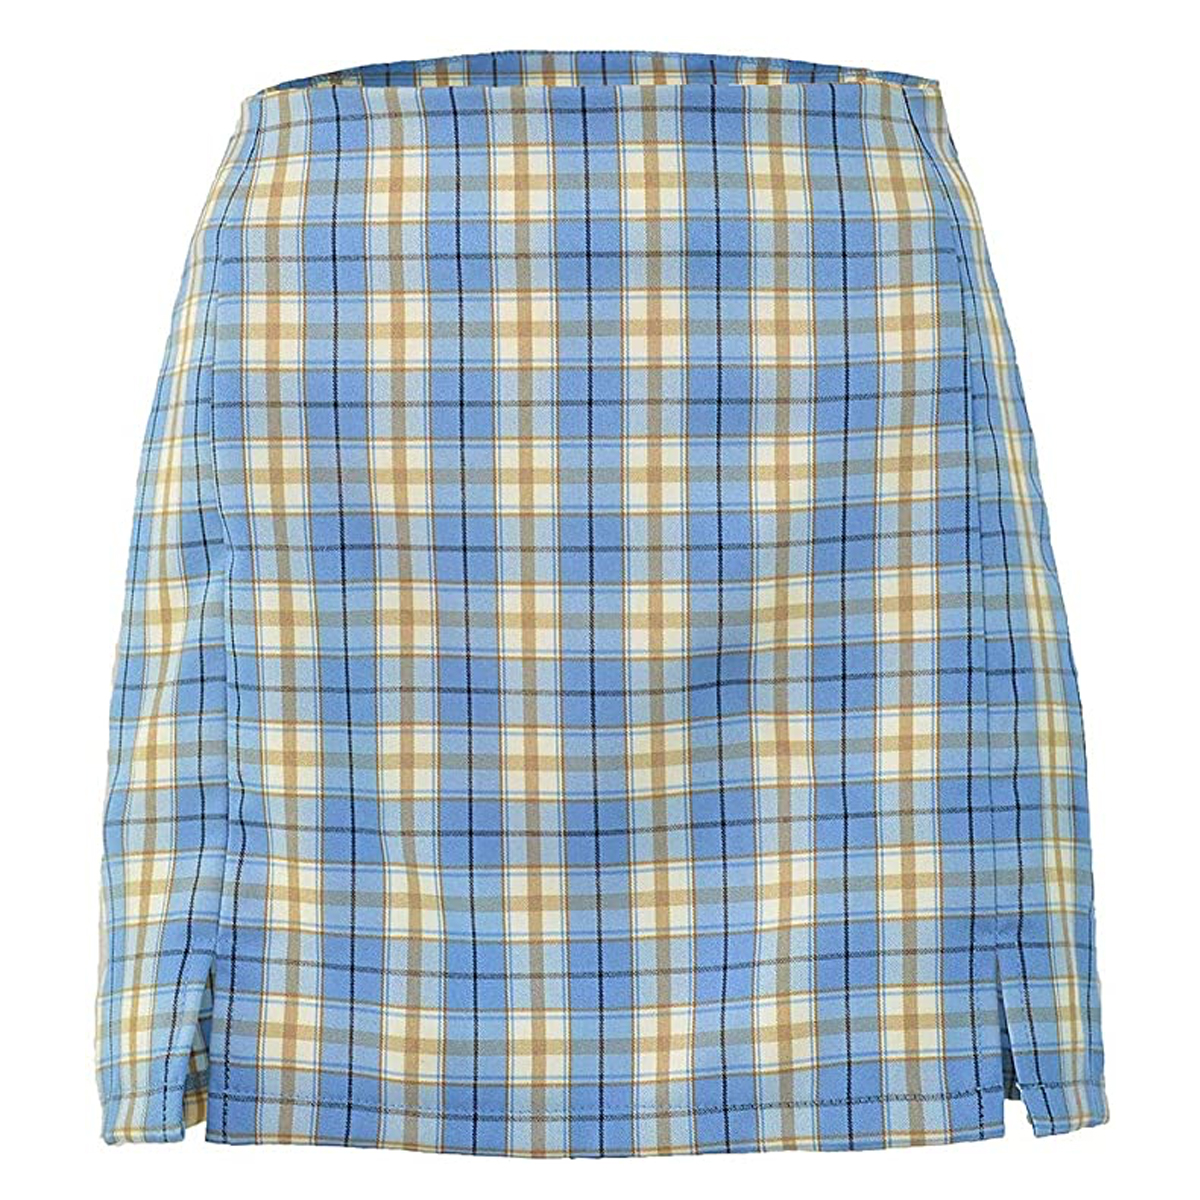 11 Plaid-Skirt Outfits to Try This Season | Who What Wear